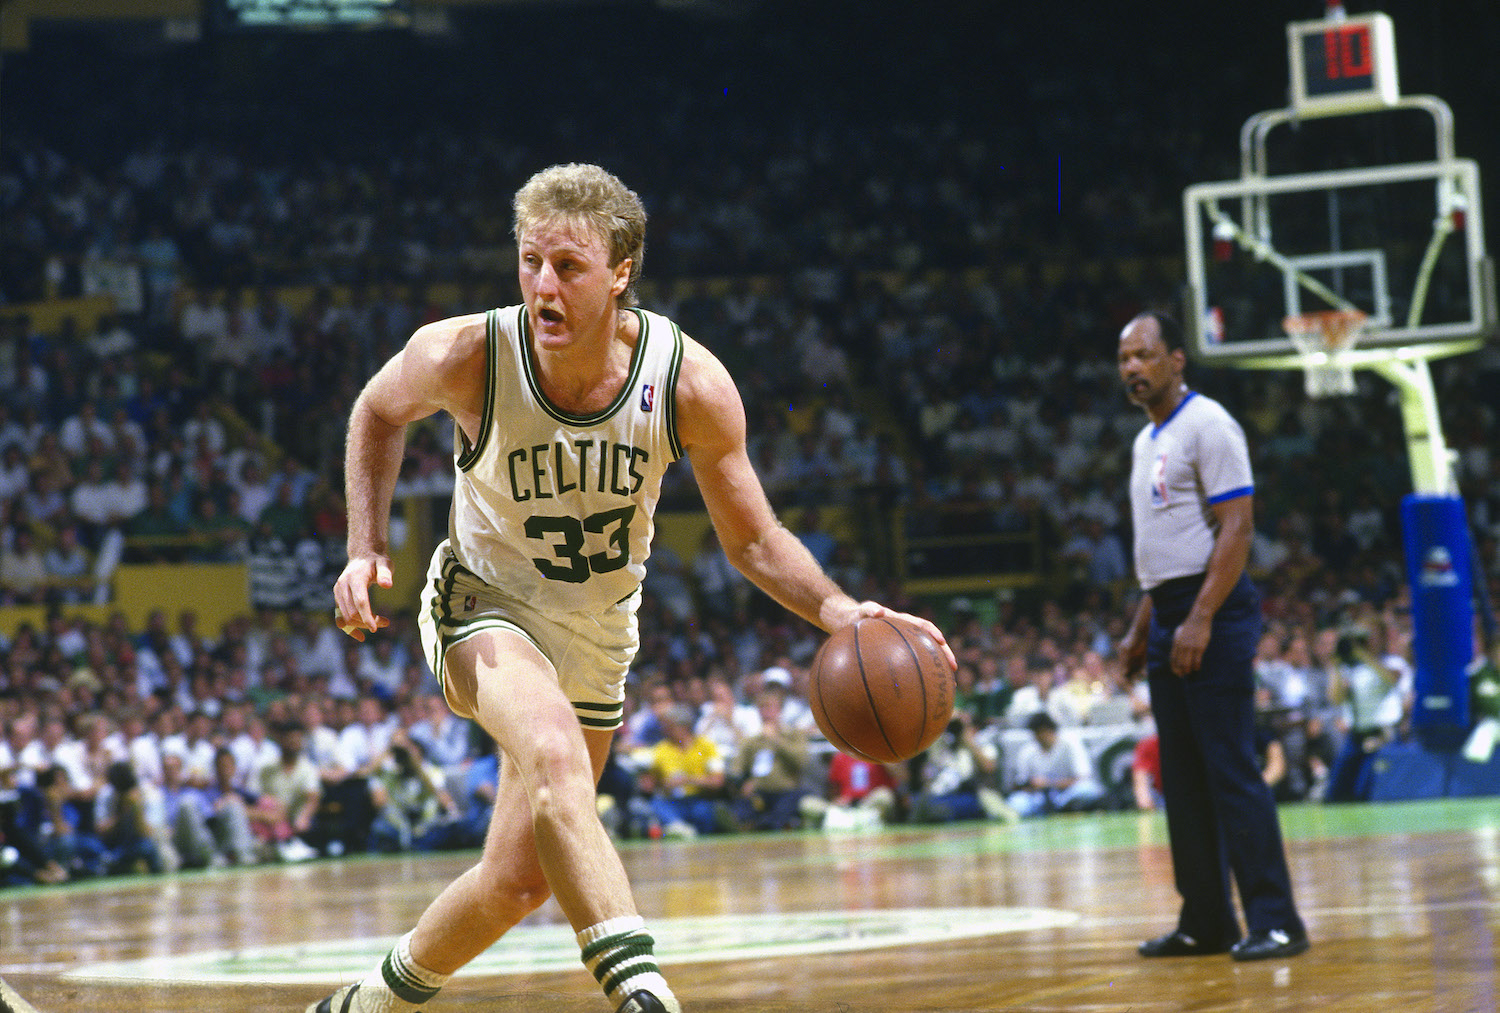 Boston Celtics forward Larry Bird drives to the basket during the 1987 NBA playoffs.